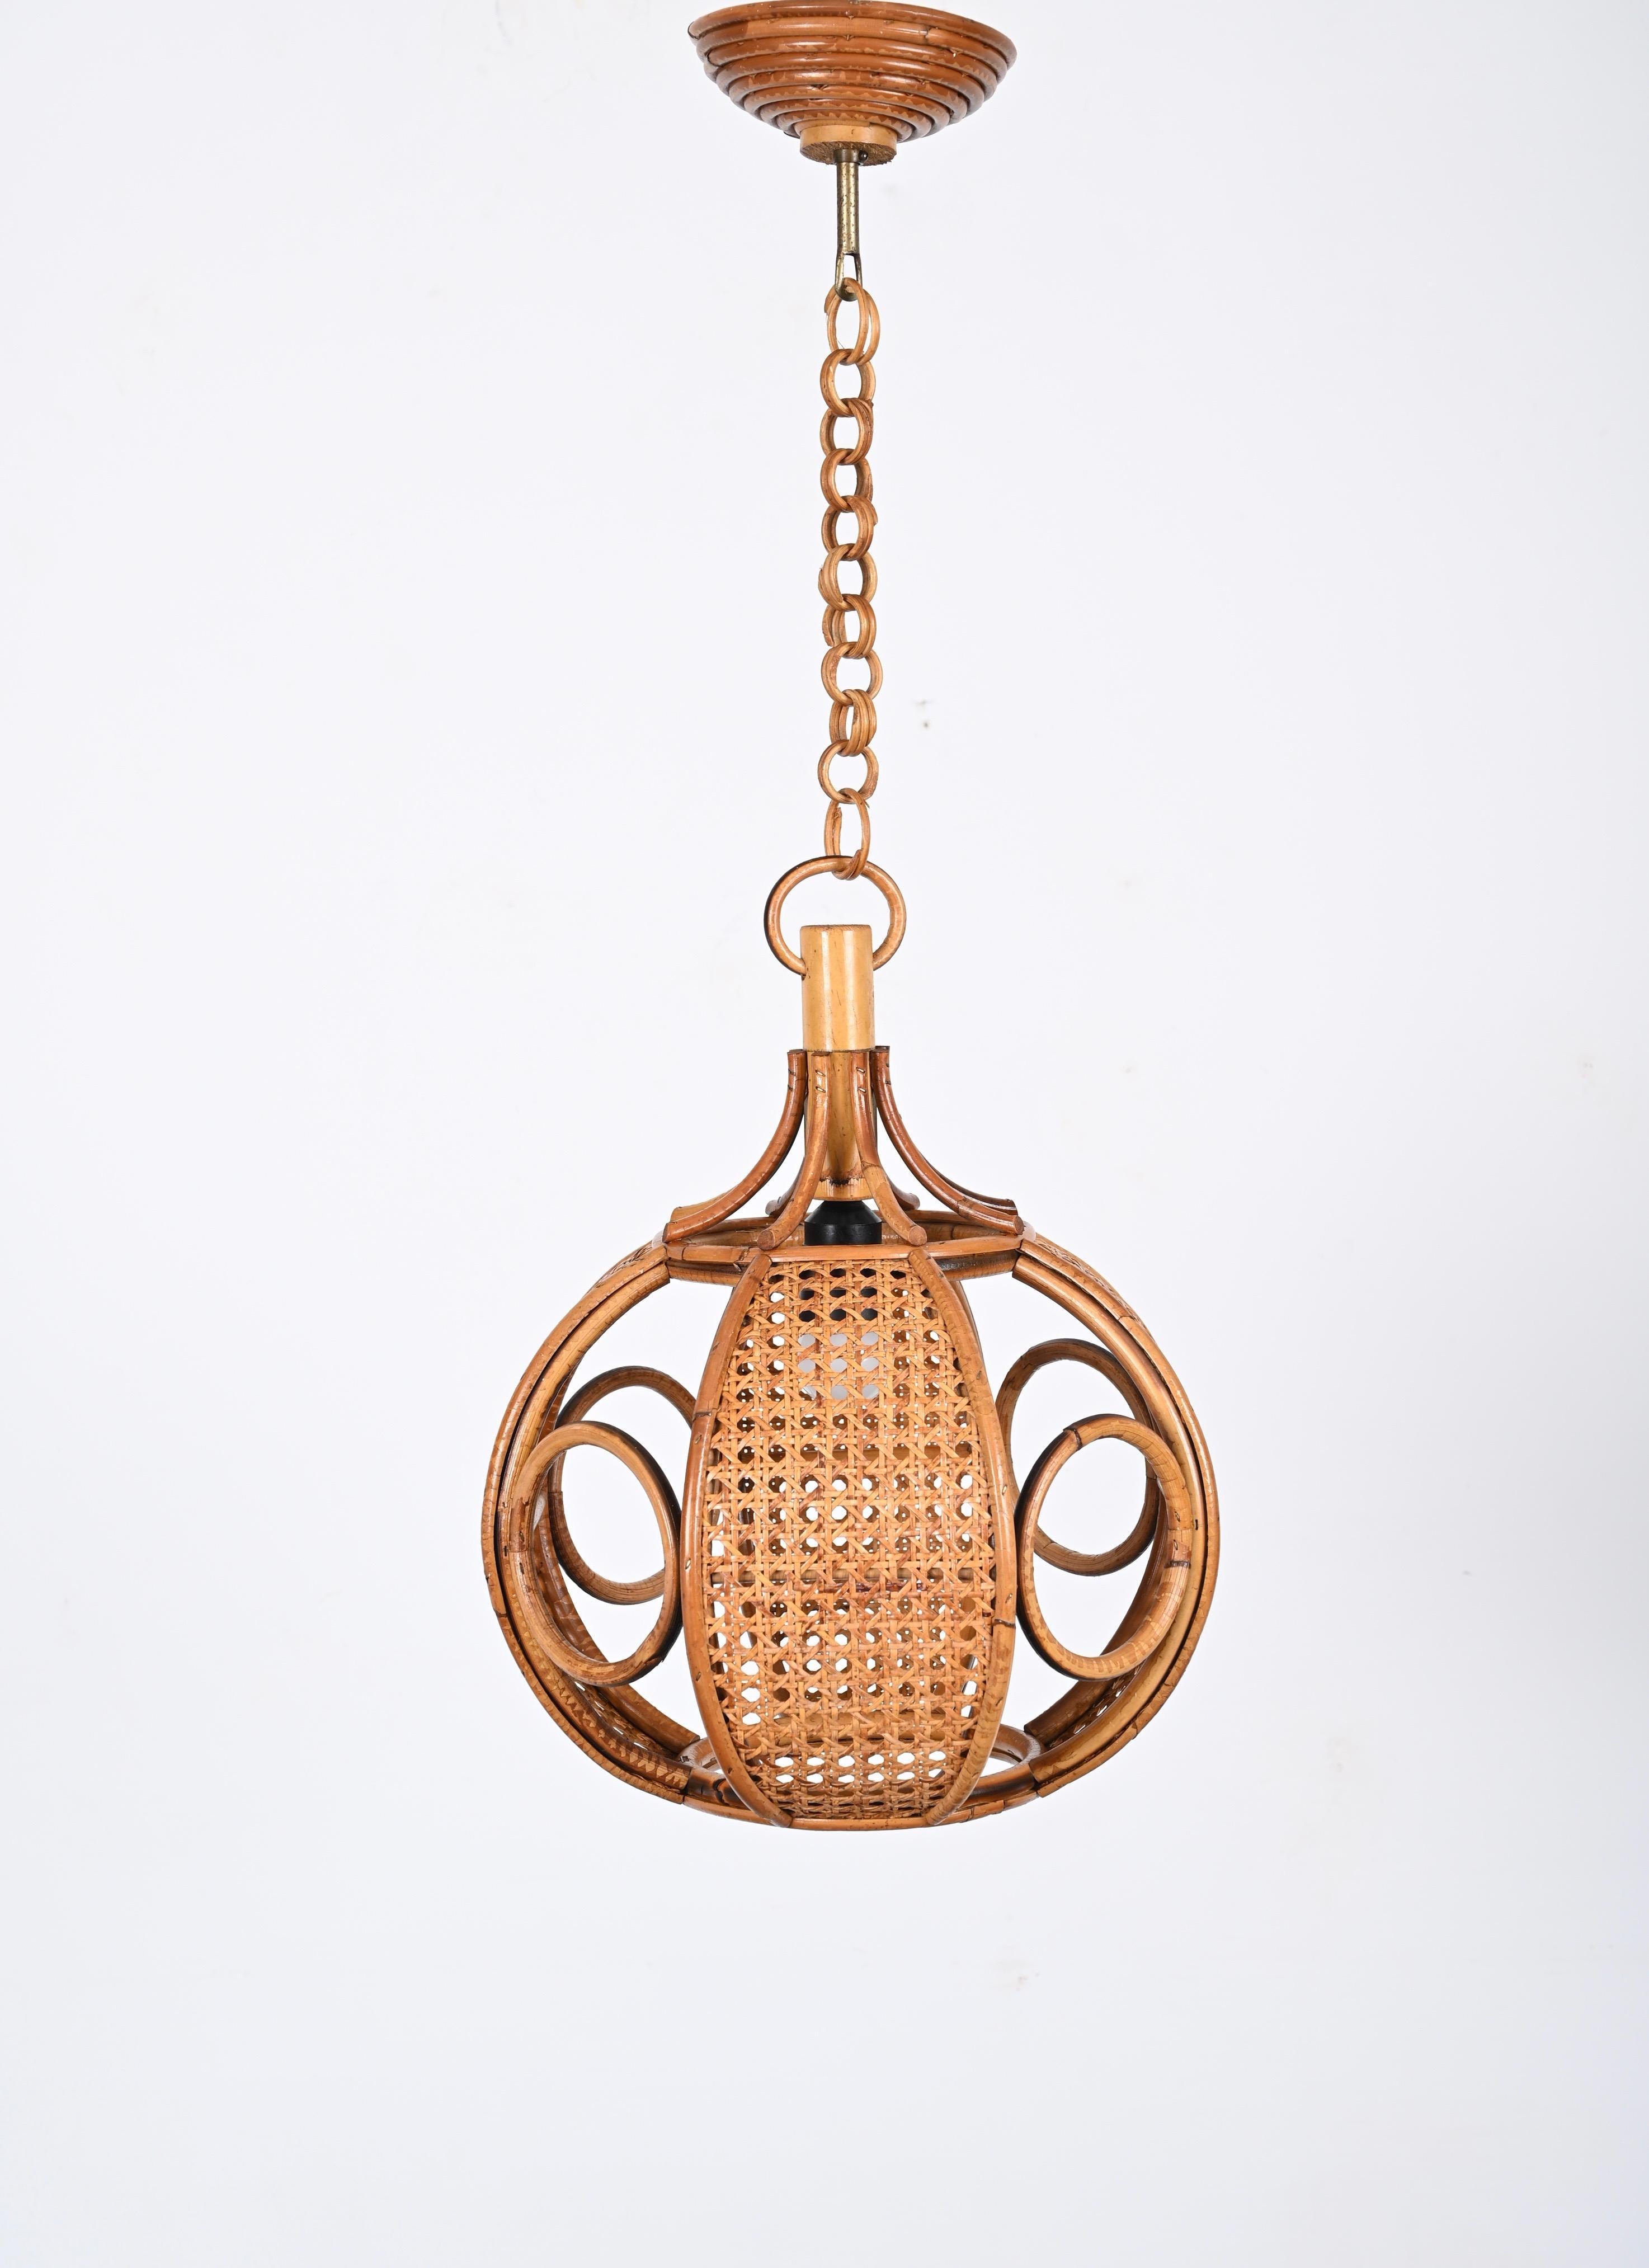 Midcentury French Riviera Chapel Rattan and Wicker Italian Chandelier, 1960s In Good Condition For Sale In Roma, IT